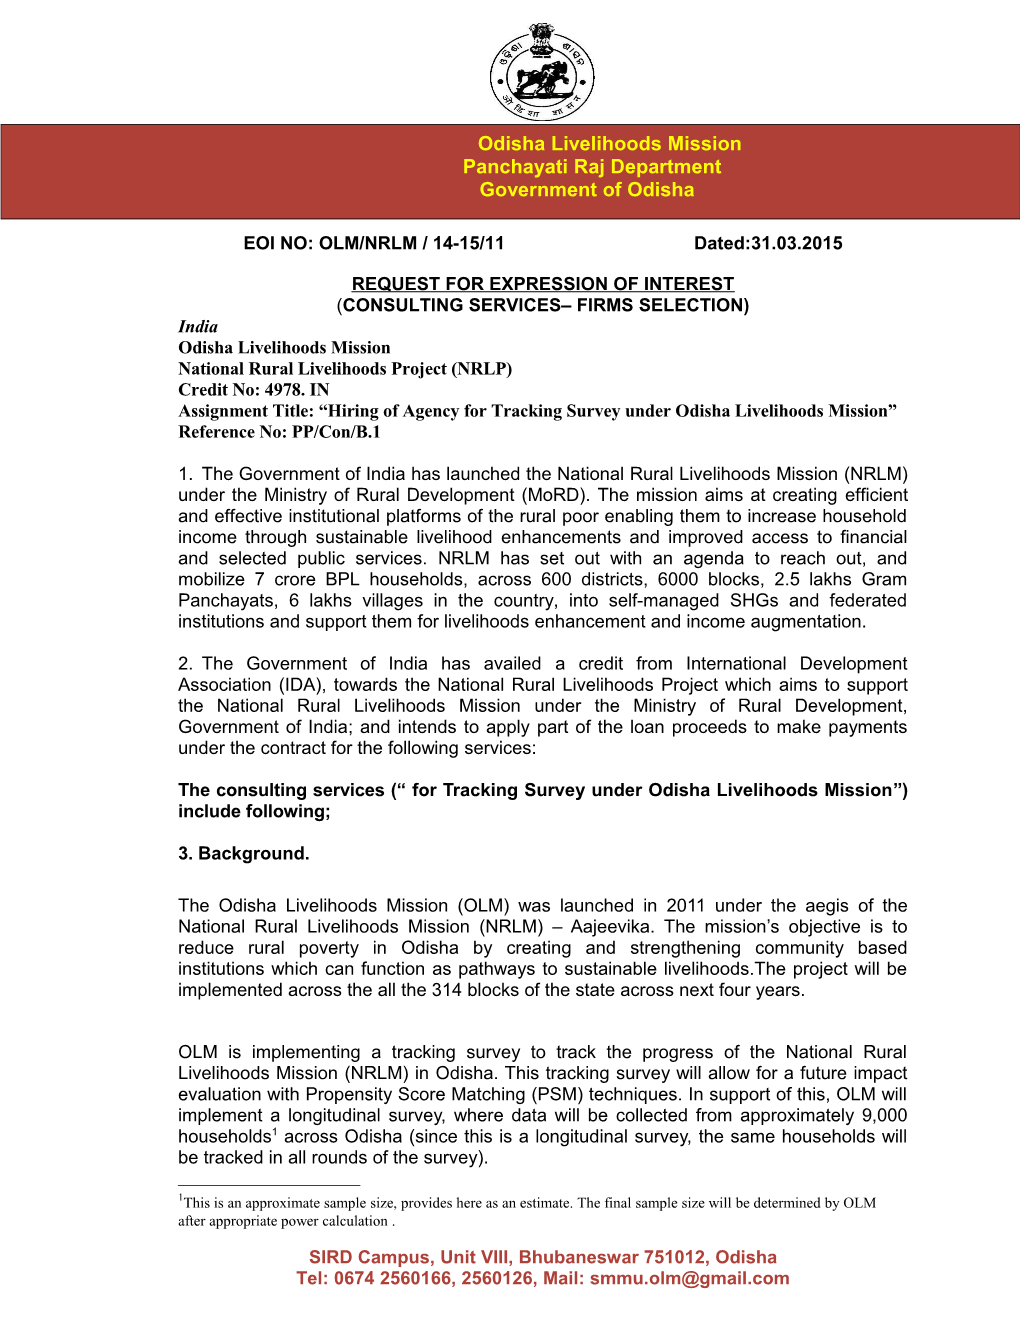 EOI NO: OLM/NRLM / 14-15/11 Dated:31.03.2015